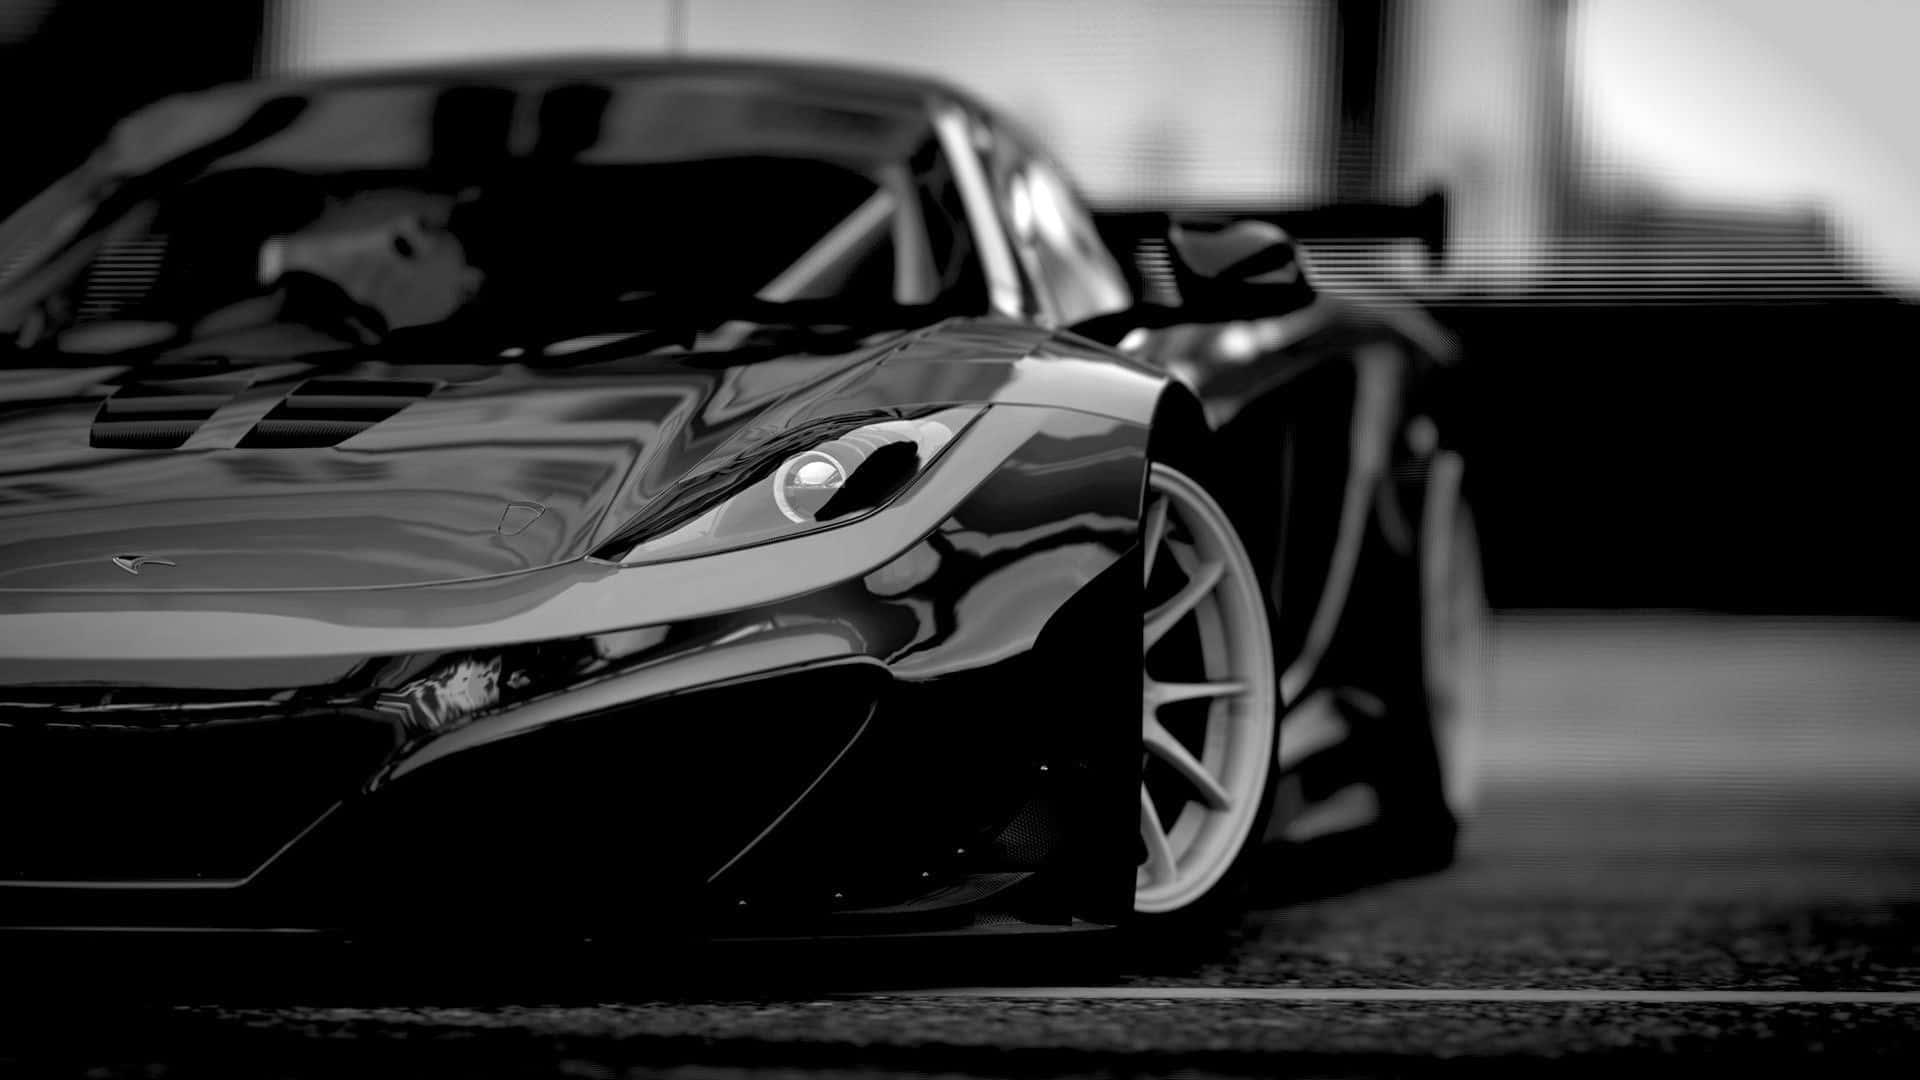 Black and White Luxury Car Wallpaper